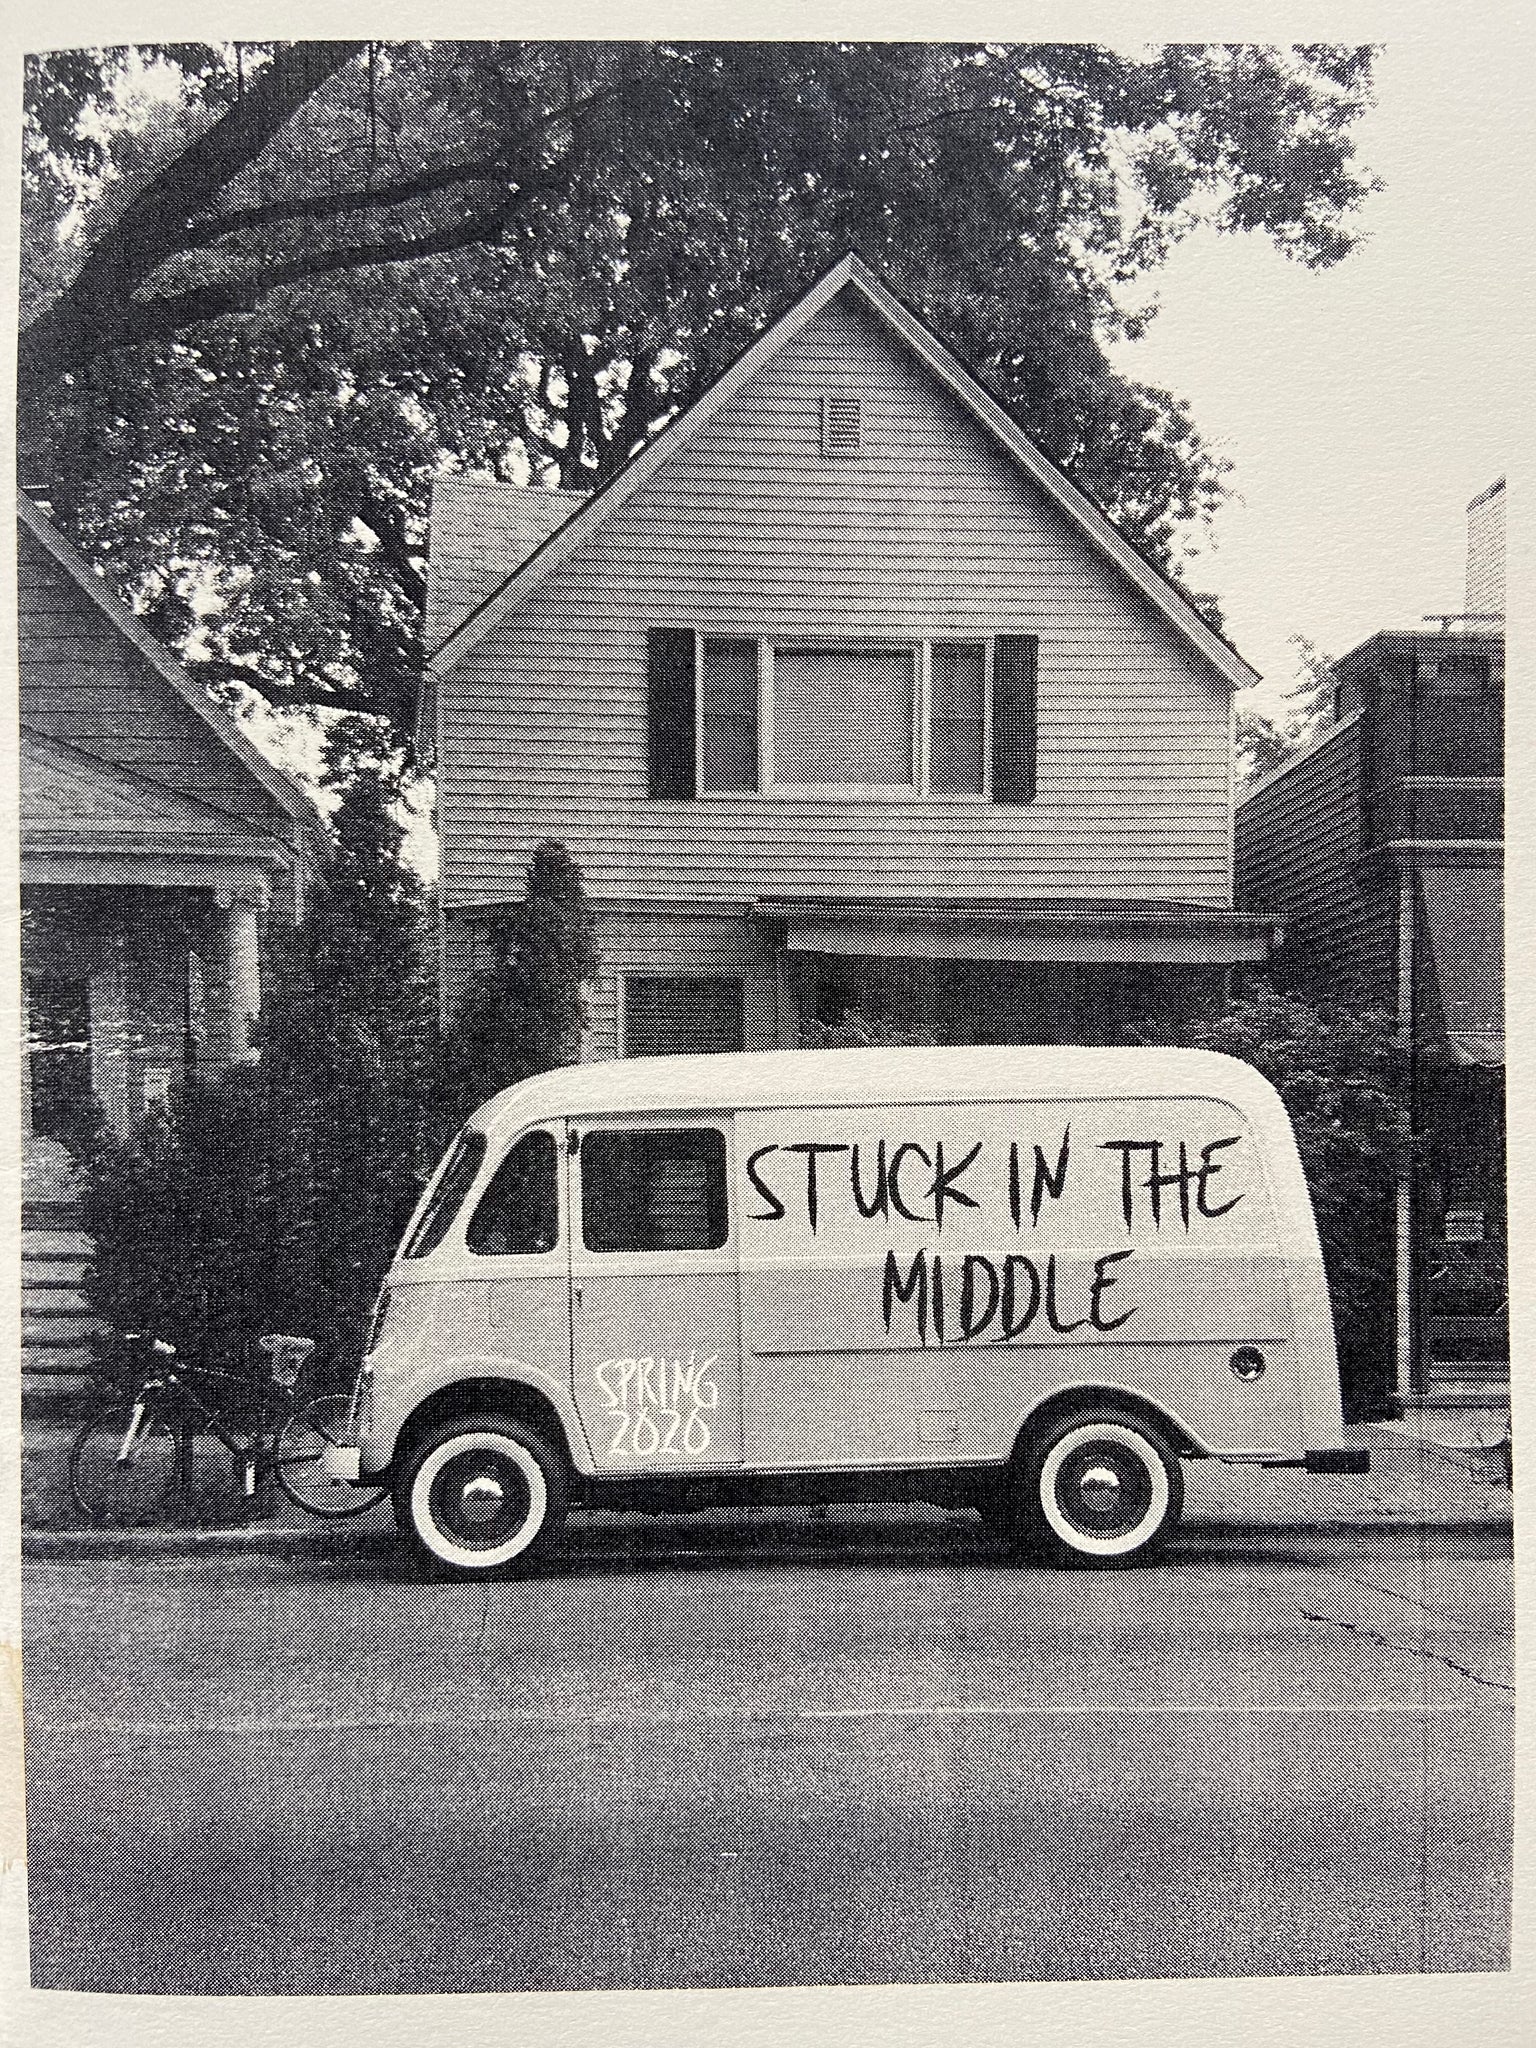 Stuck in the Middle - Issue 1 - Home